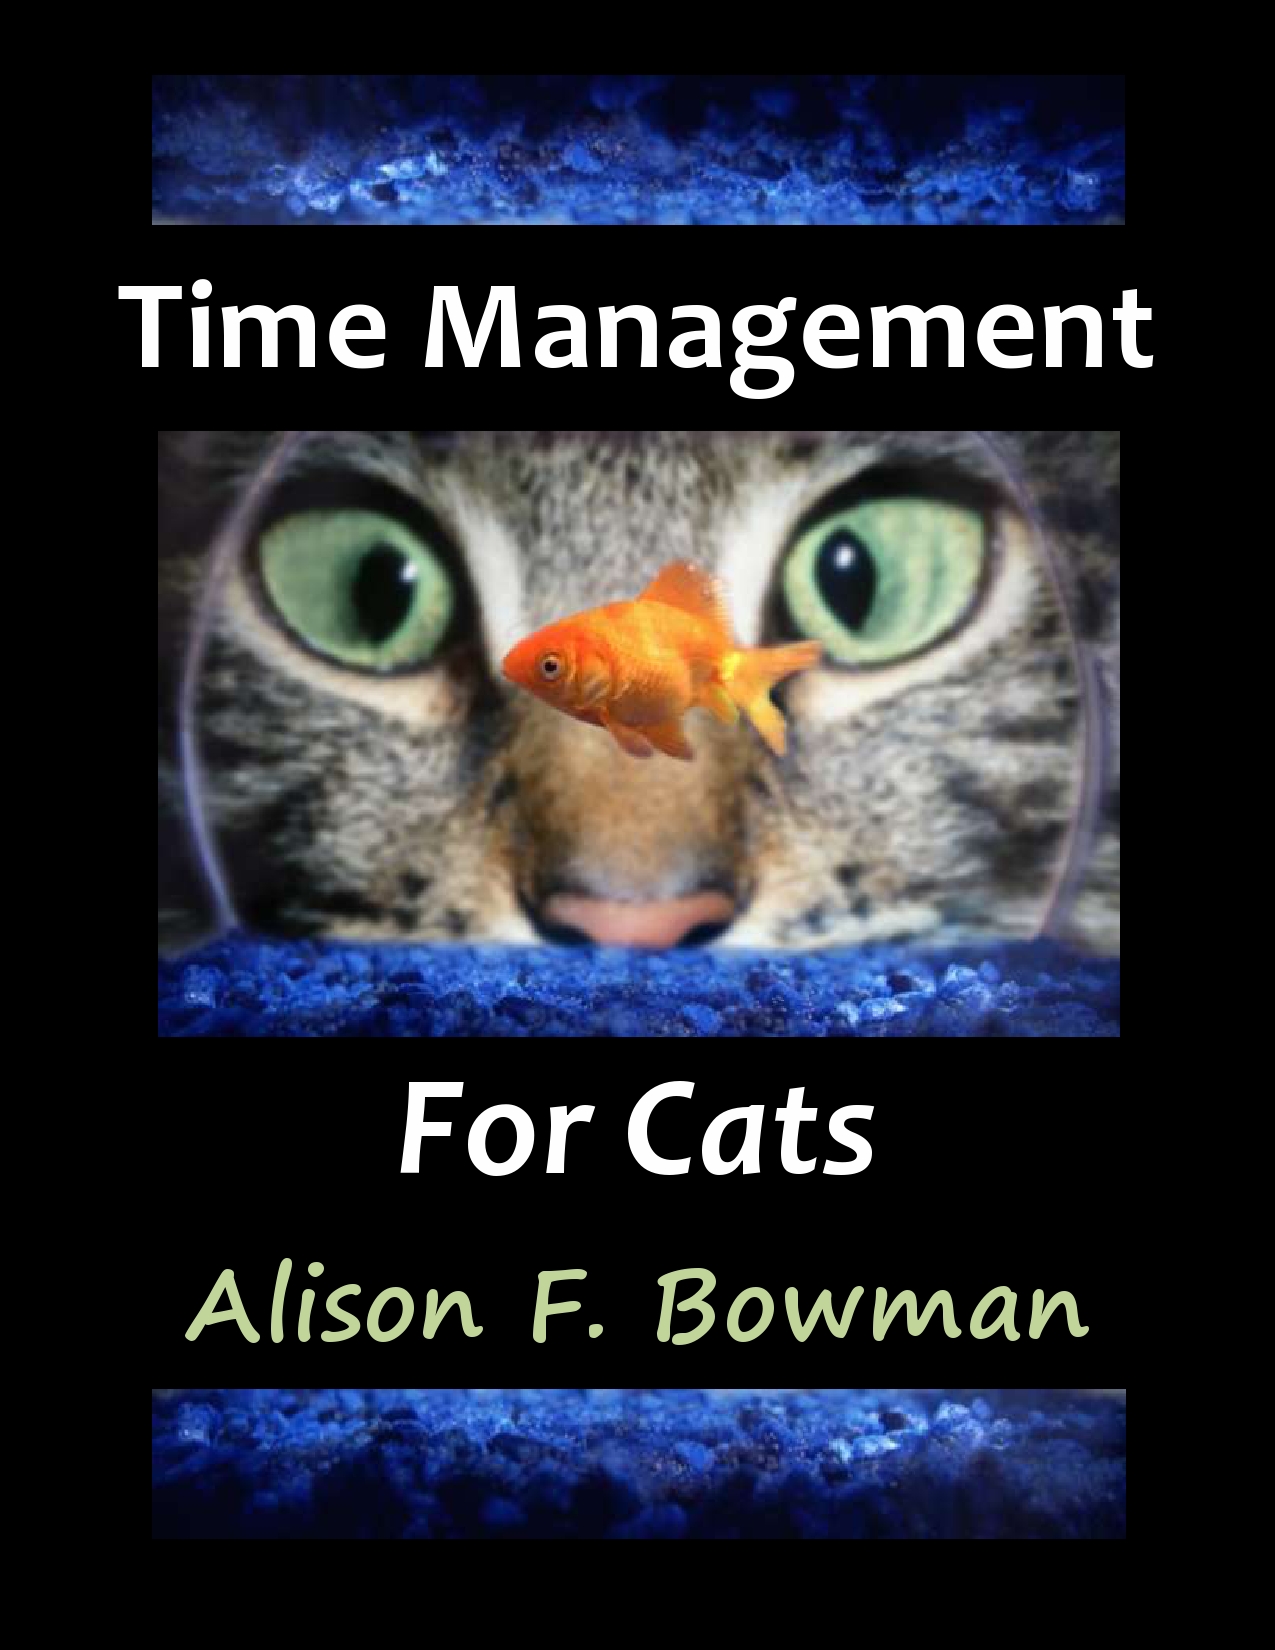 Time Management for Cats book cover